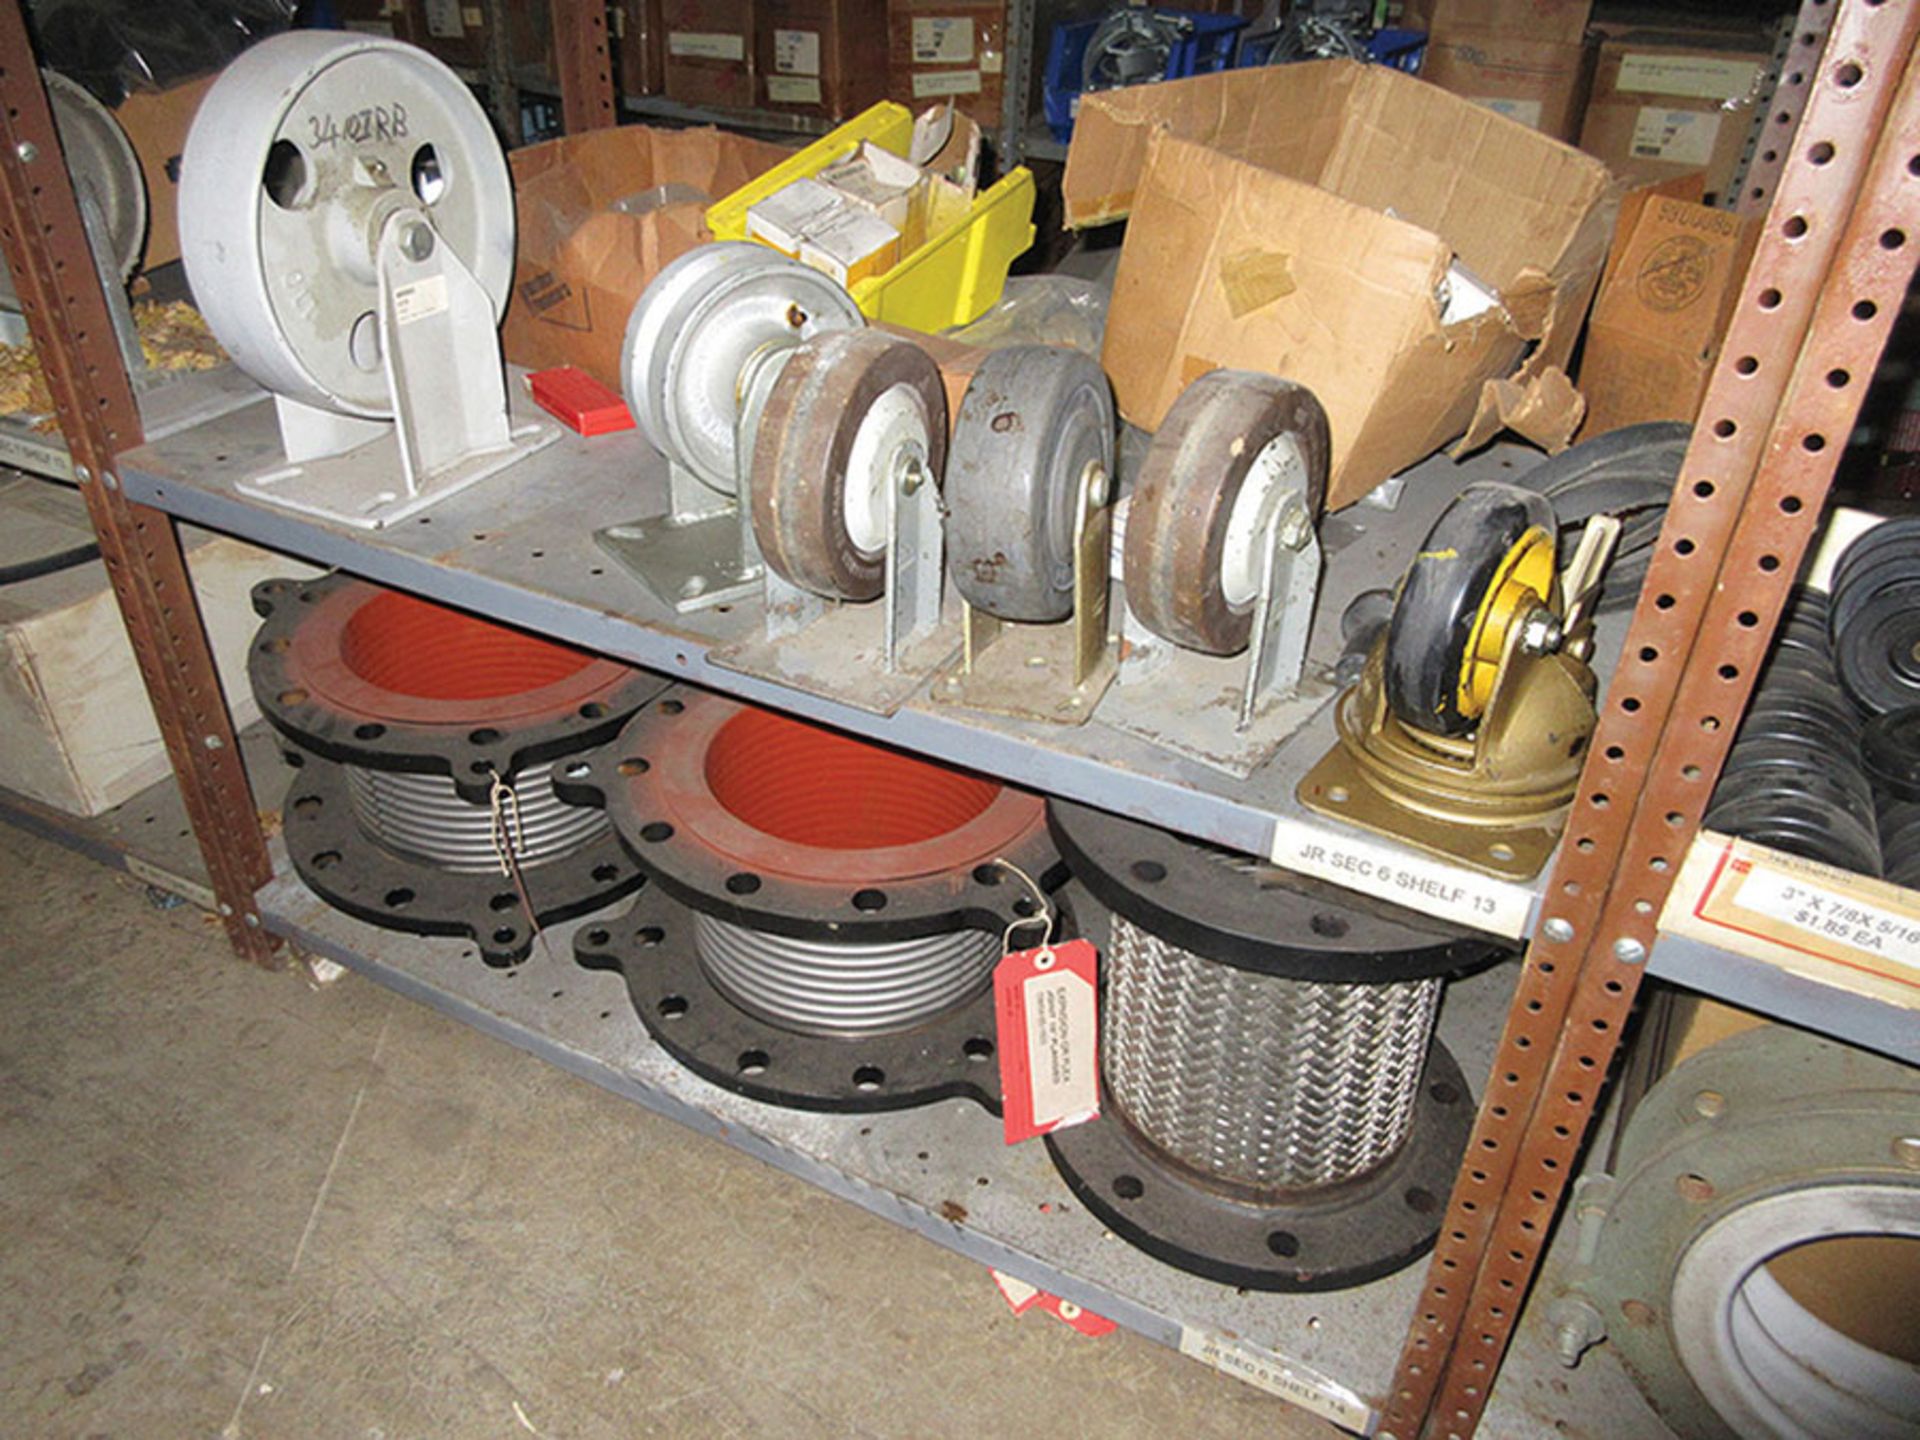 CONTENTS OF LOWER PART (1) SIDE, (4) SECTIONS OF SHELF UNIT: ASSORTMENT OF WHEELS & CASTERS; - Image 6 of 10